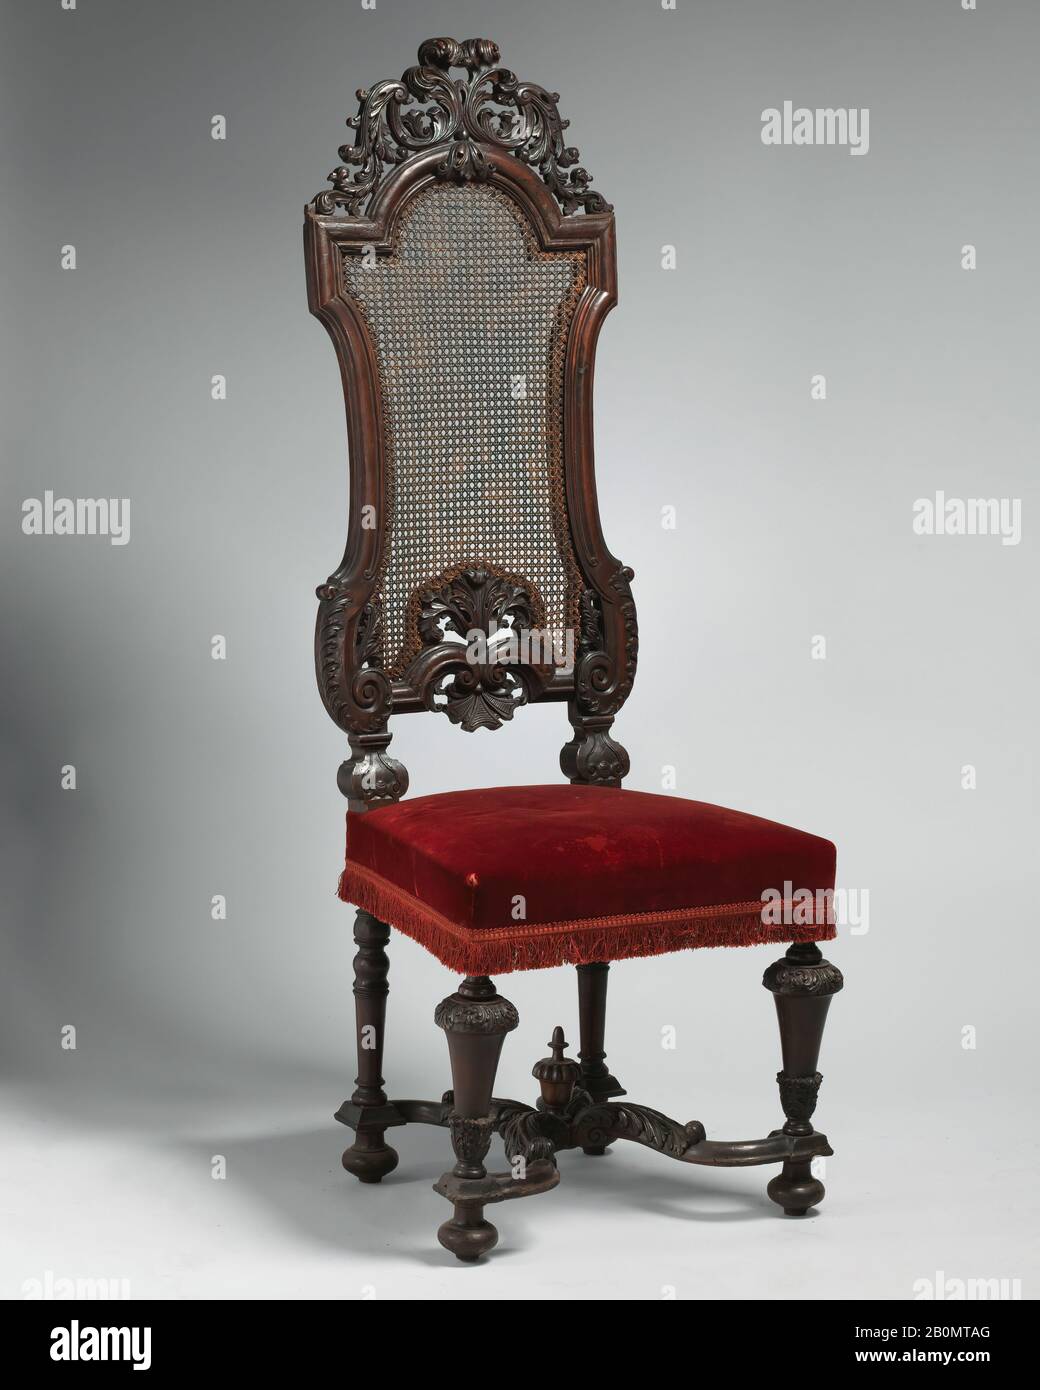 Chair (one of a set of six), British, ca. 1695, British, Walnut, caning; velvet not original to frame, Overall: 55 1/4 × 20 1/4 × 17 in. (140.3 × 51.4 × 43.2 cm), Woodwork-Furniture Stock Photo